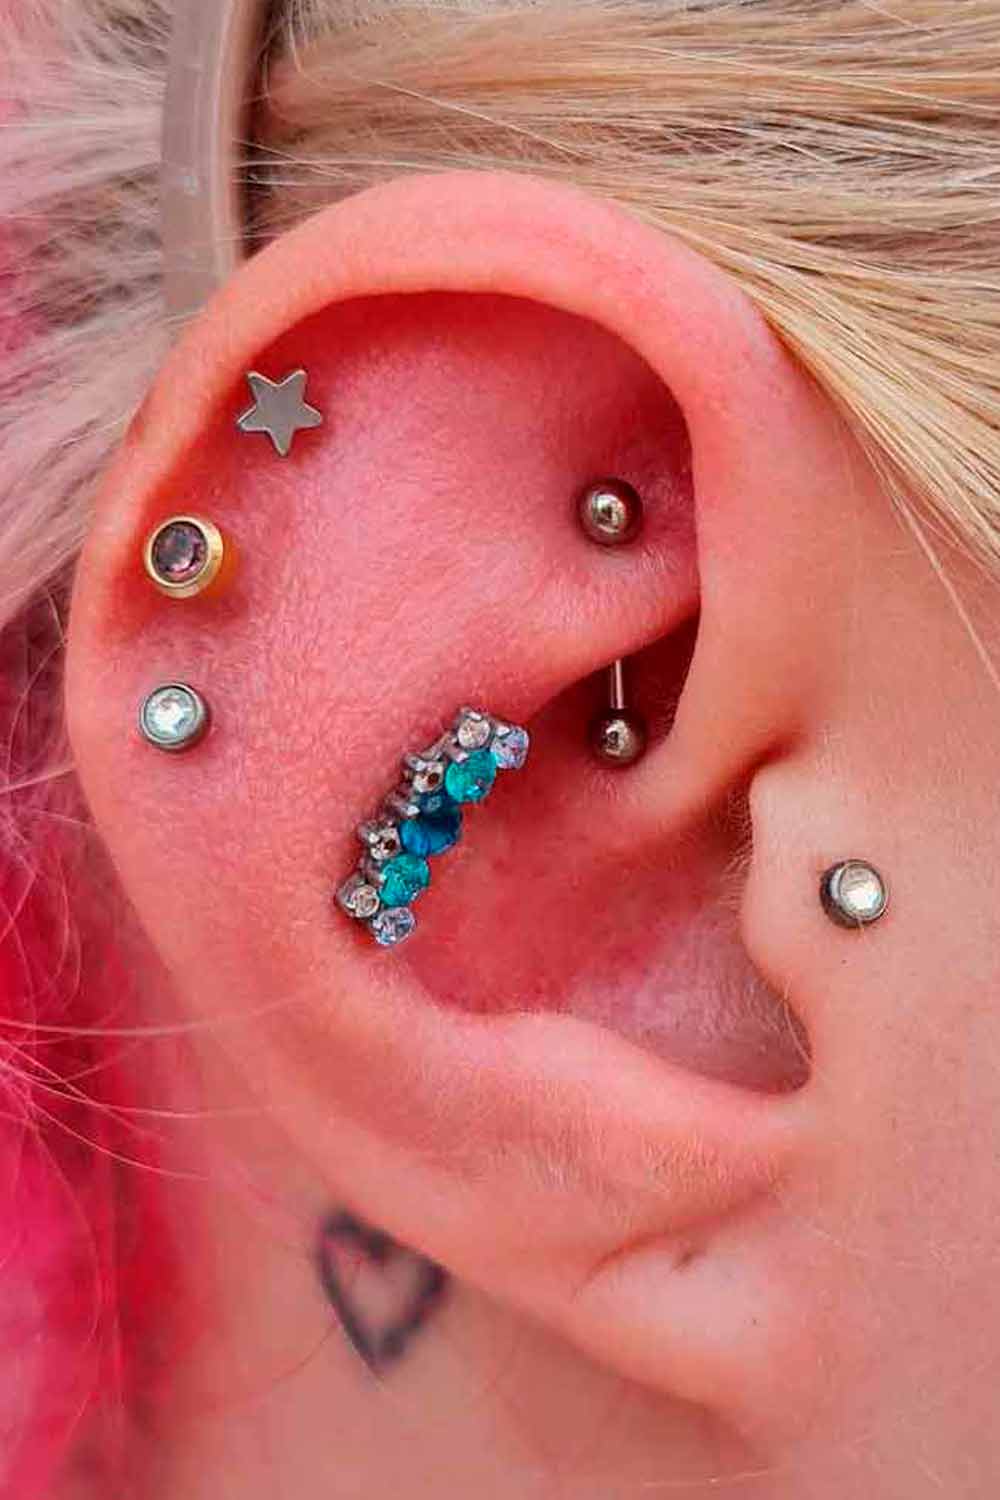 Rook Piercing. What is it?